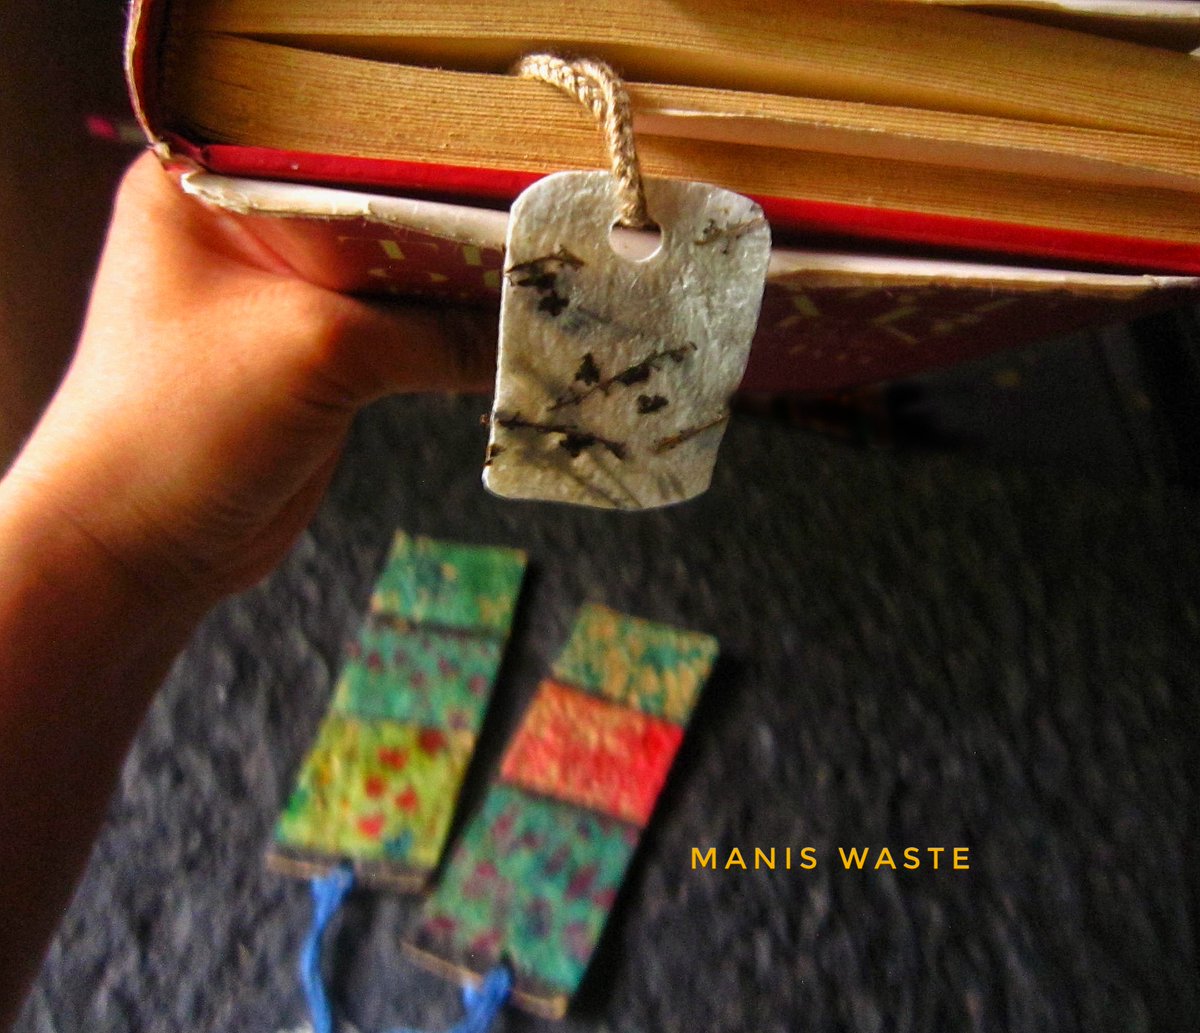 Recycle paper bookmark with food color stamp and dry flower.One set book accessories fo make beautiful touch of your book.Buy it on etsy :maniswasteandcraft.etsy.com
#recyclepaper #recyclebookmark #sustainablegift #stamppaper #setbookmark #ecofriendlygift